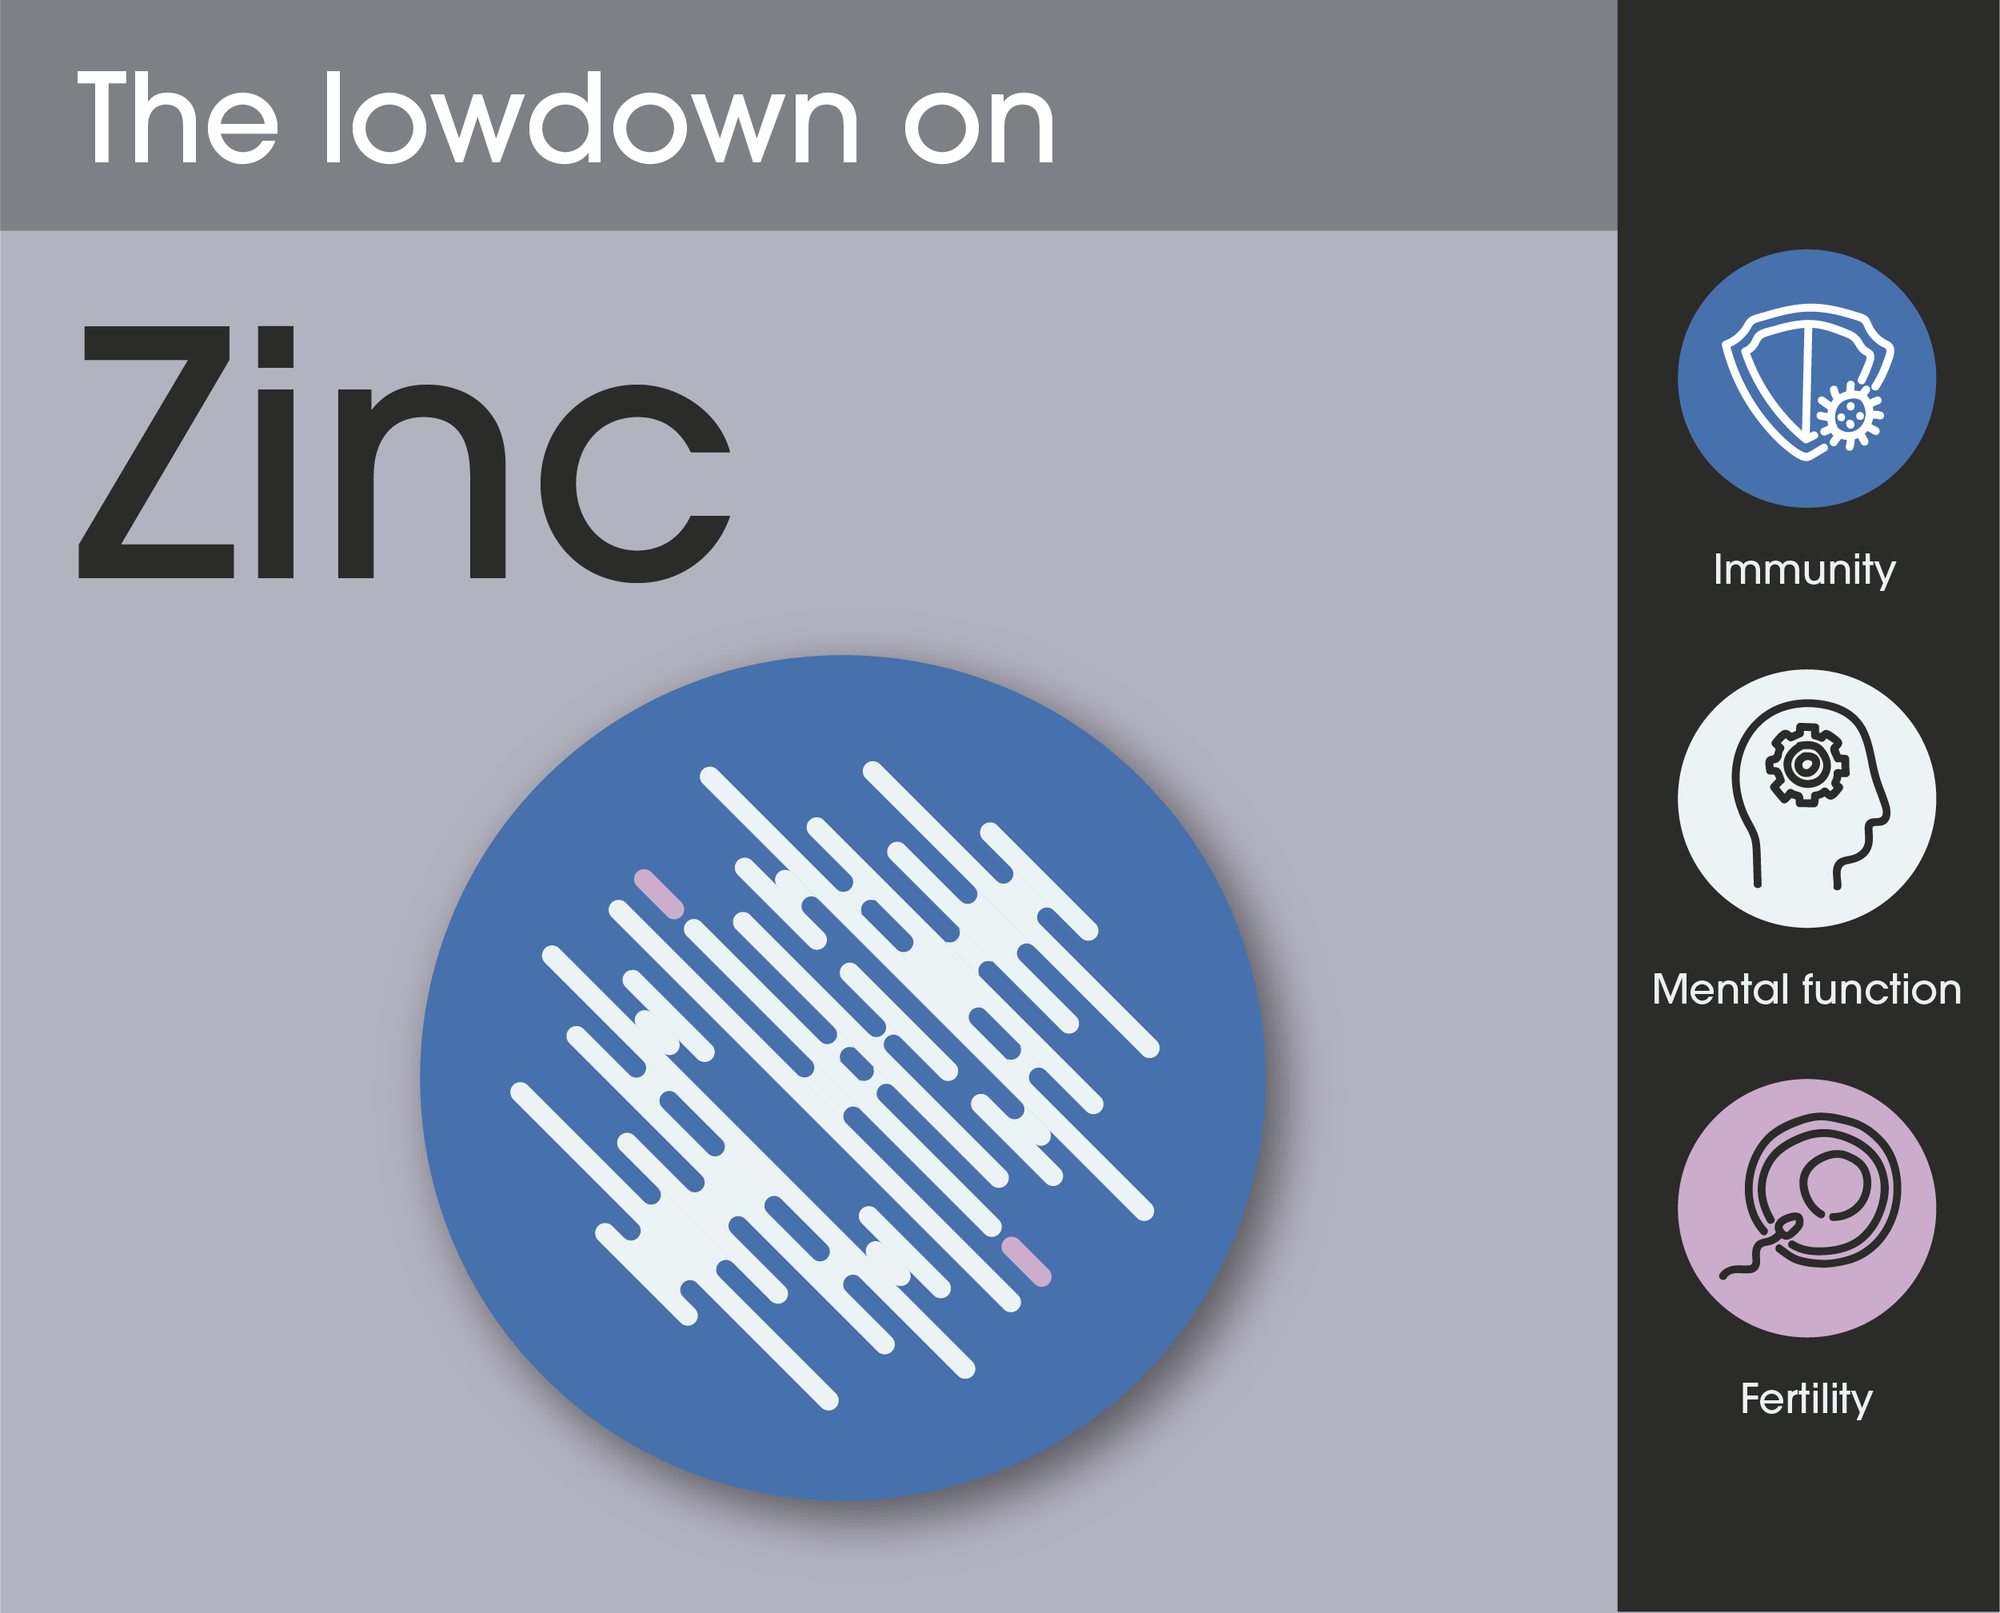 What are the benefits of Zinc?